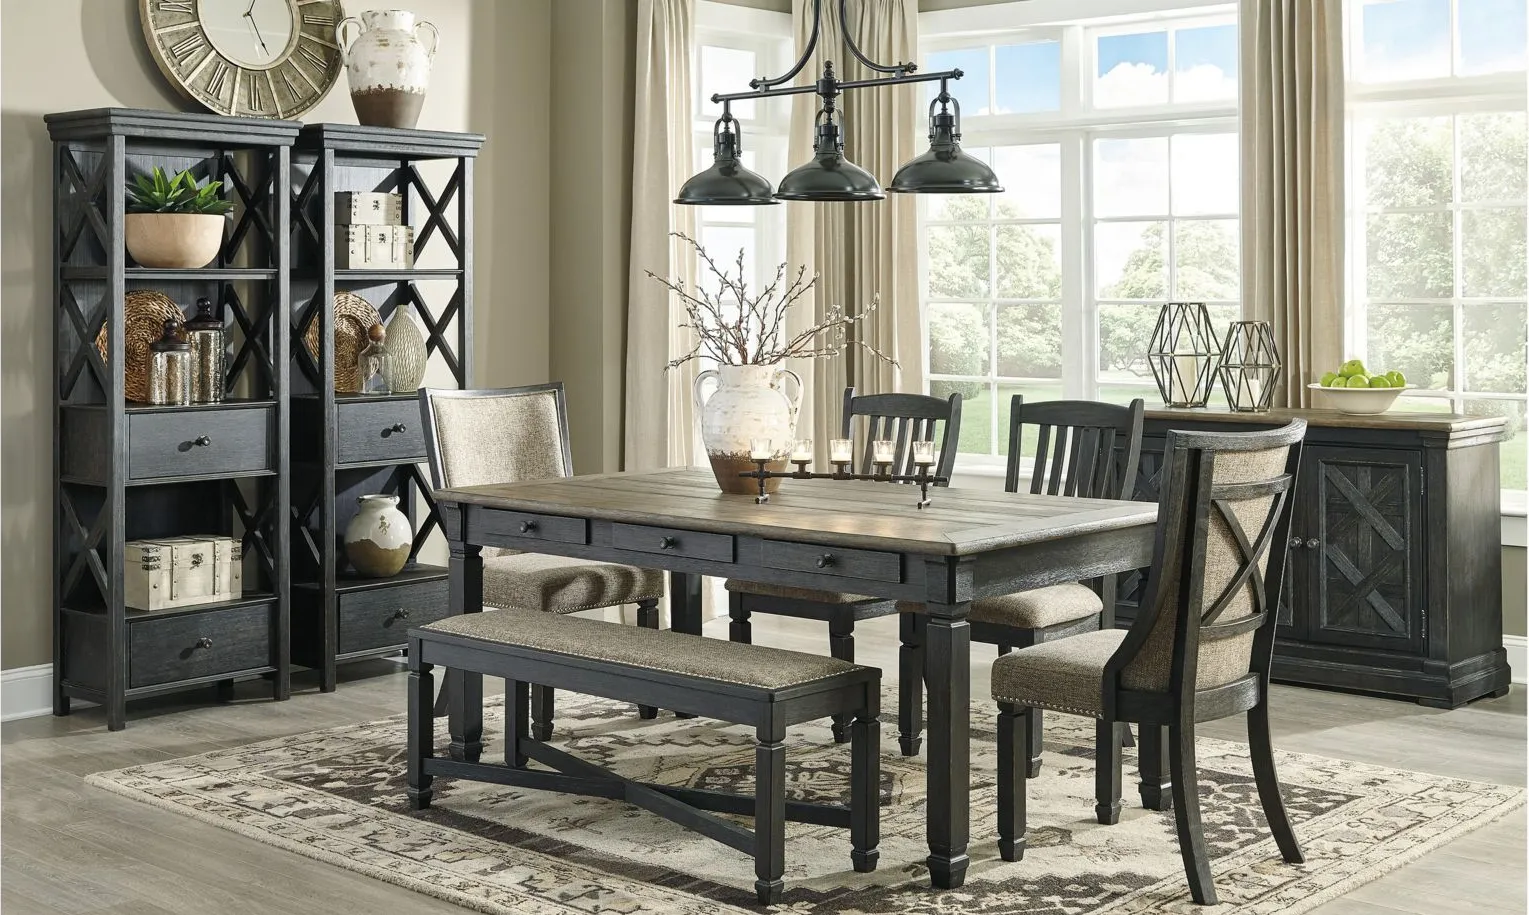 Vail 6-pc. Dining Set w/ Bench and Upholstered Chairs in Grayish Brown / Black by Ashley Furniture